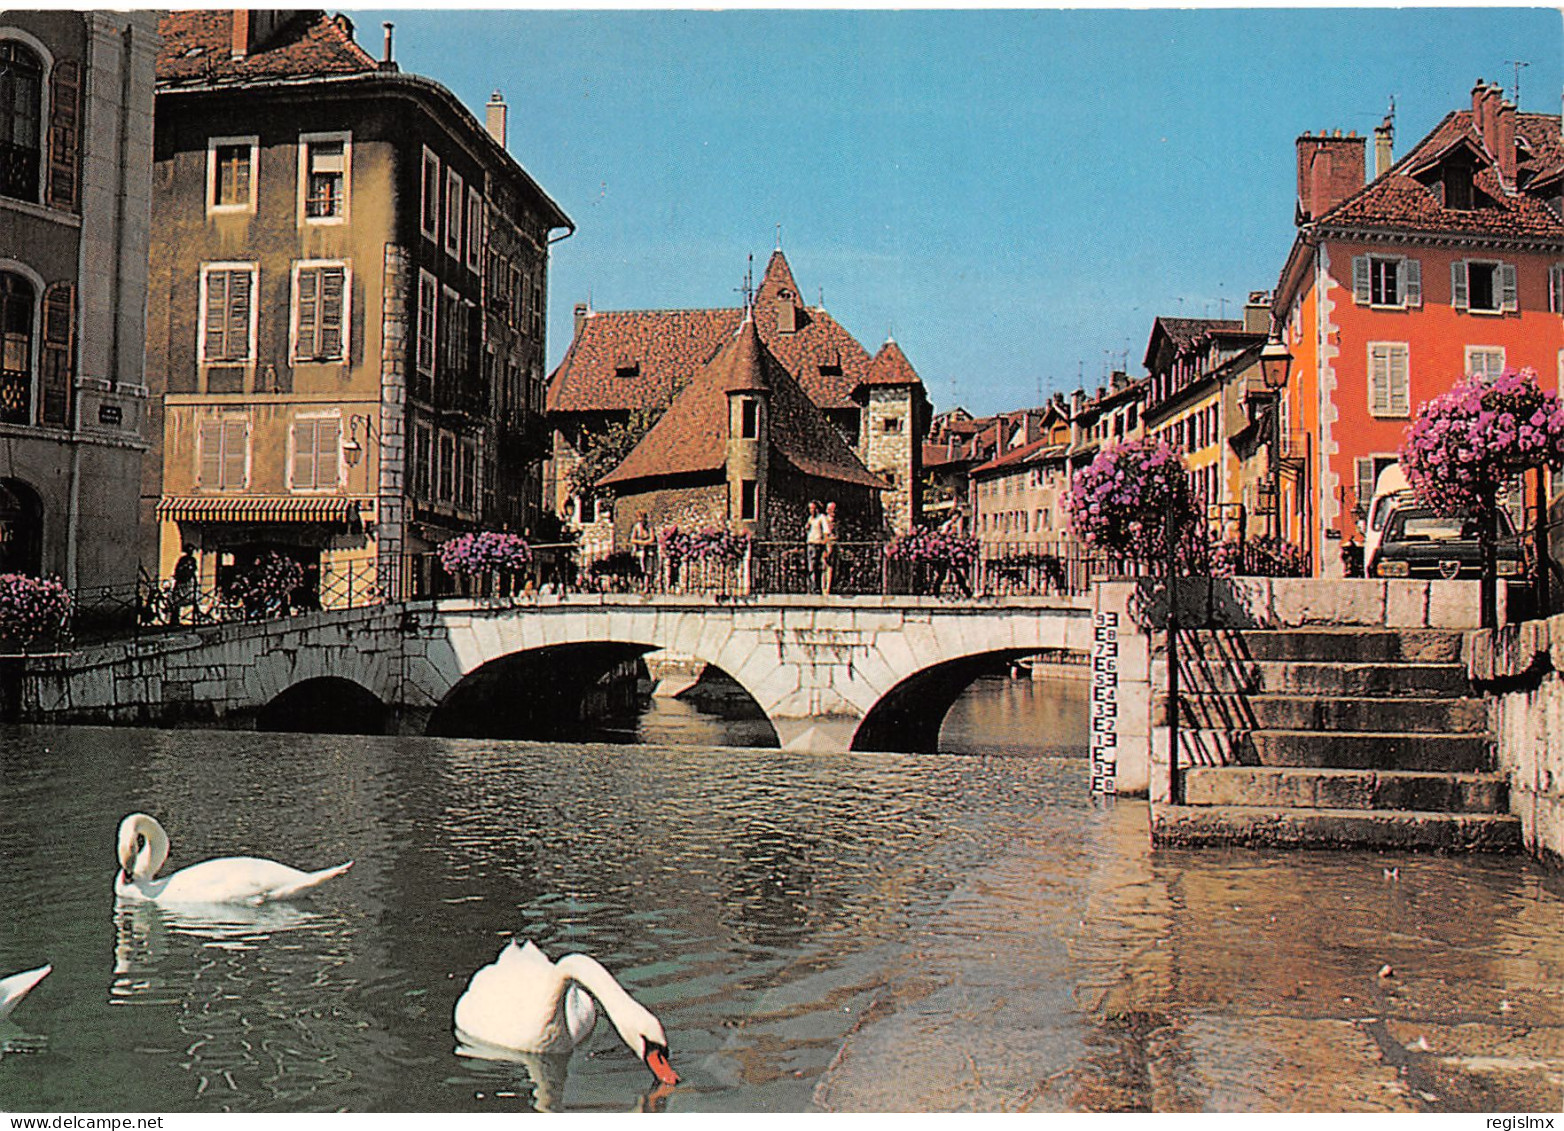 74-ANNECY-N°T2662-A/0005 - Annecy